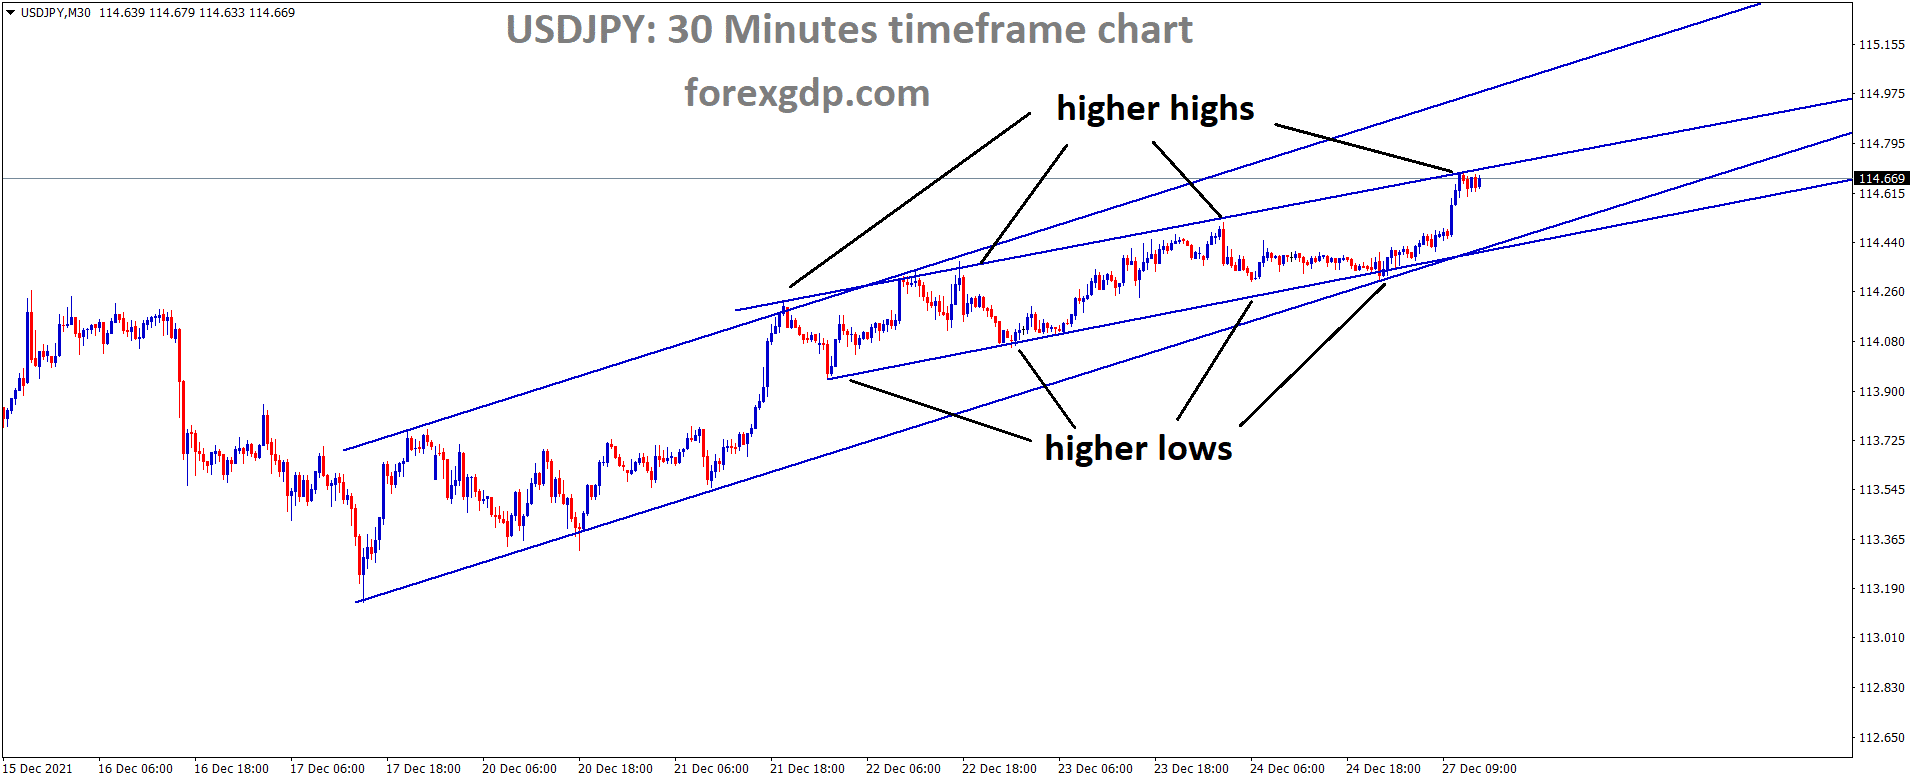 USDJPY is moving in an ascending channel and the market has reached the higher high area of the channel